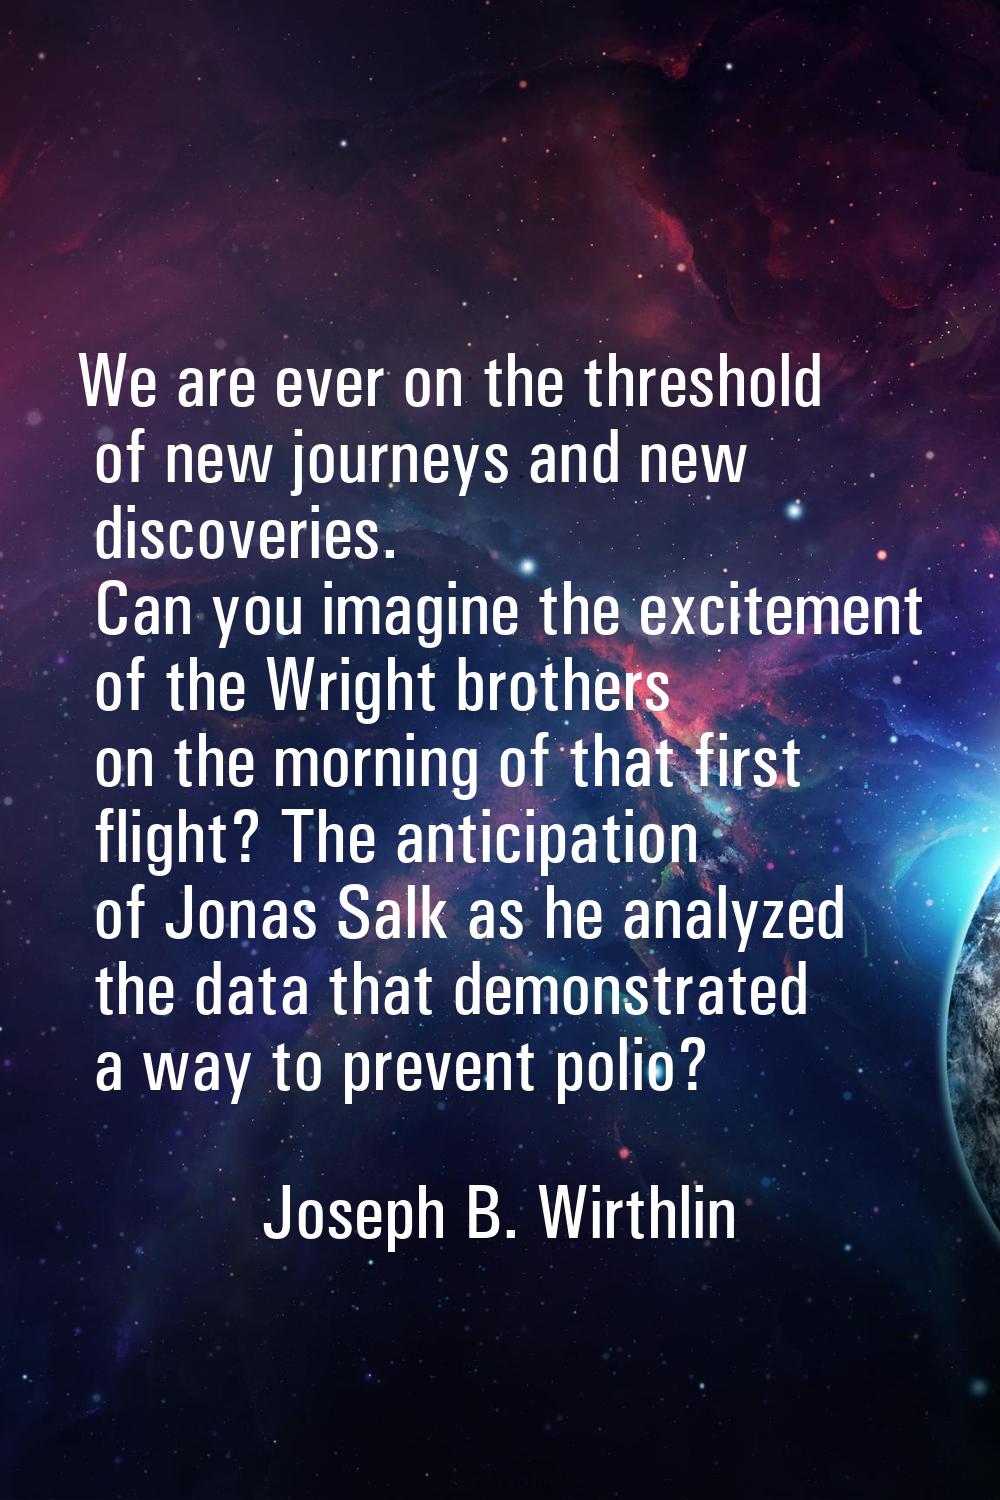 We are ever on the threshold of new journeys and new discoveries. Can you imagine the excitement of